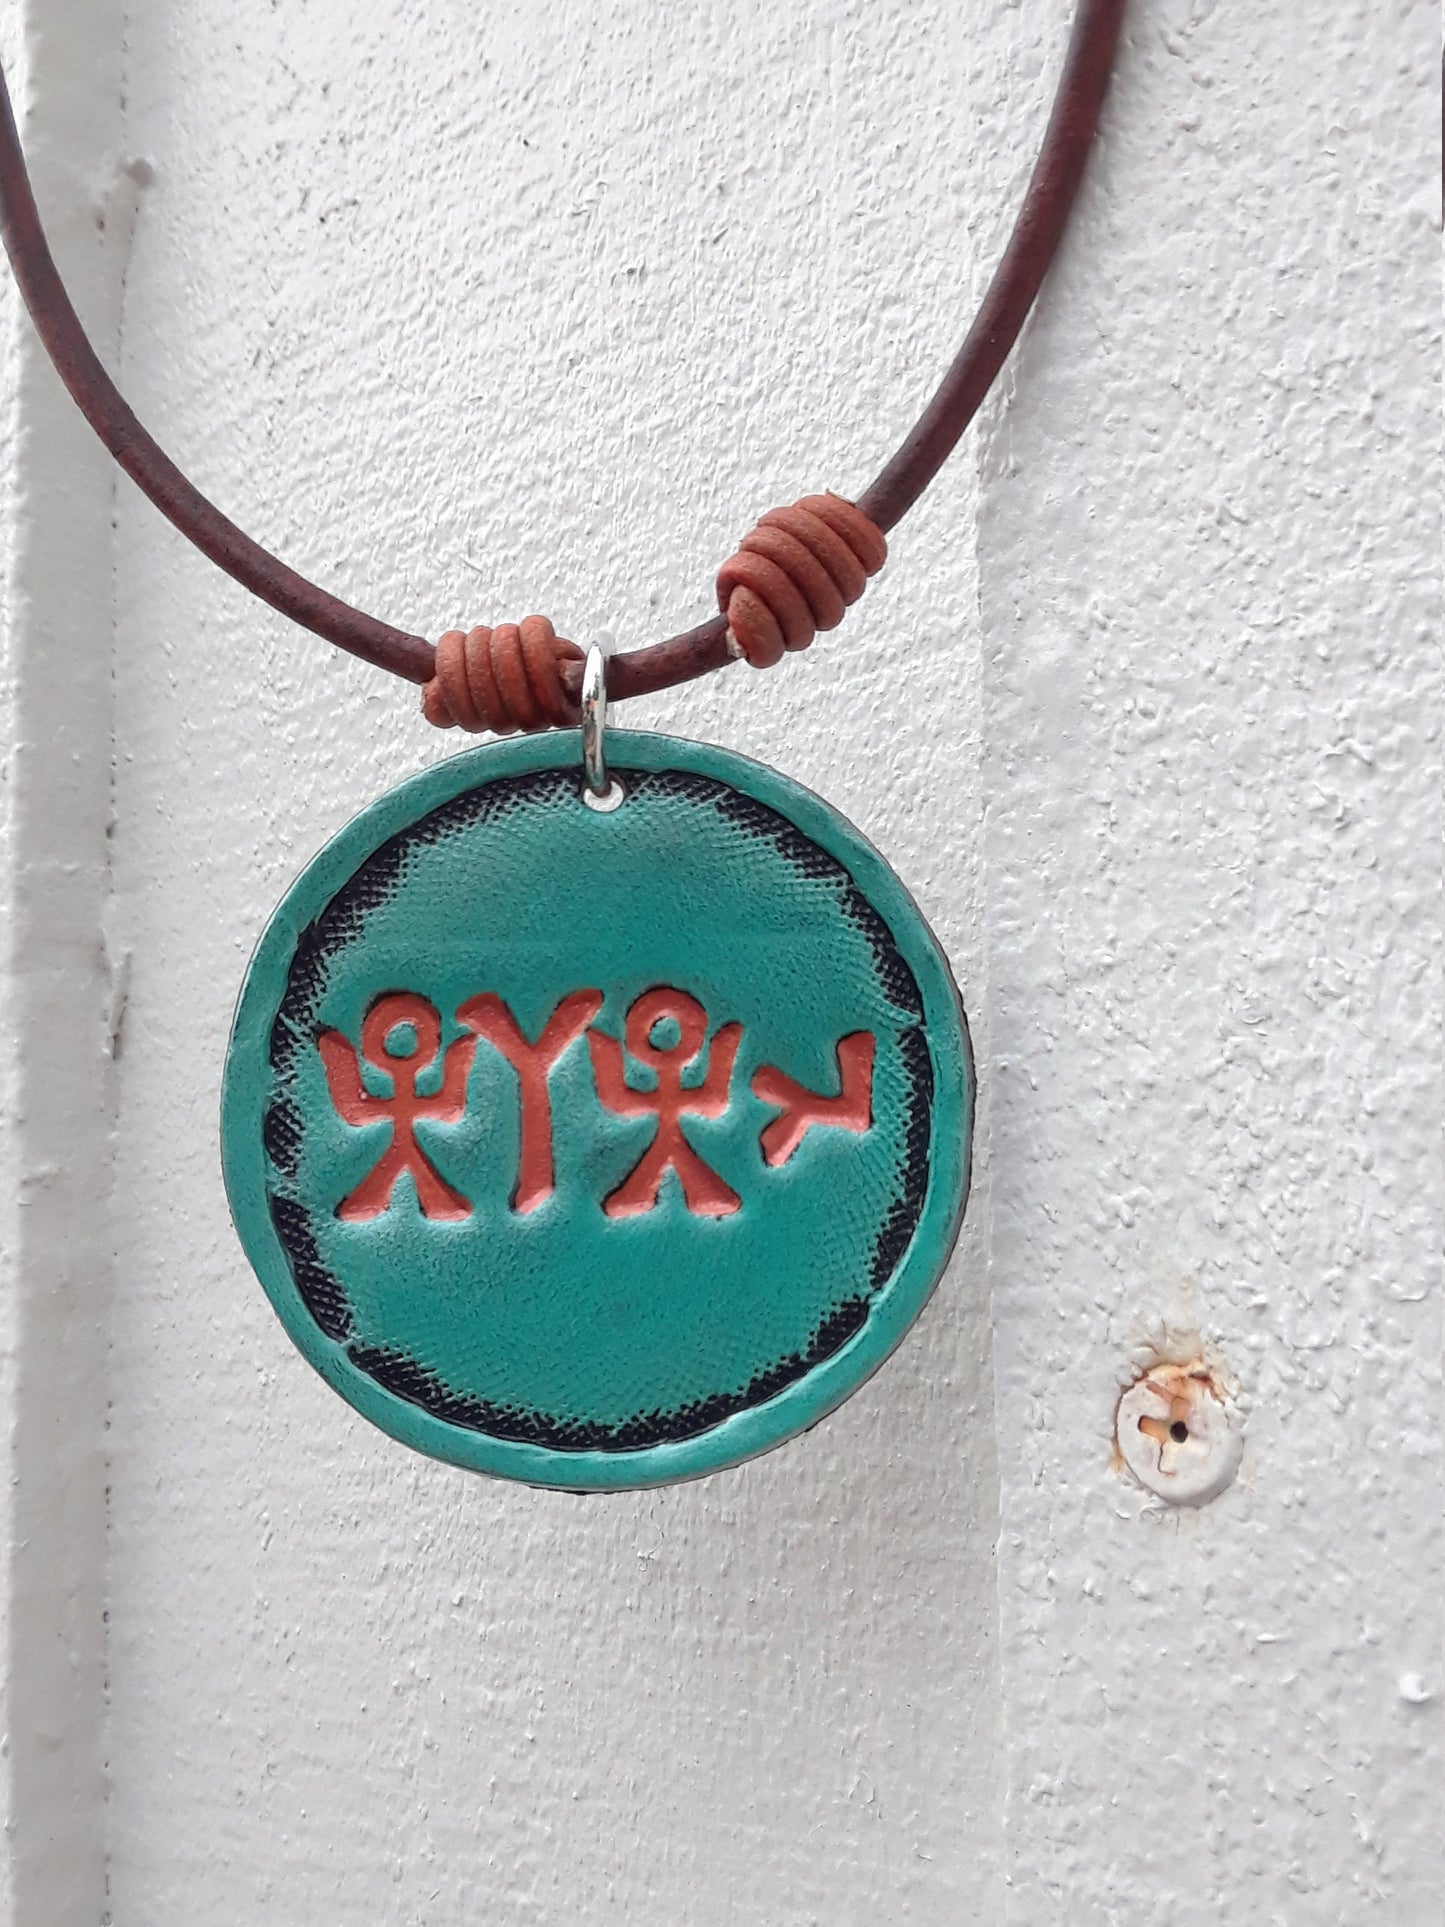 PENDANT-YHUH-COPPER on Turquoise- Unique Leather Necklace With Abba's Kadosh Name In Ancient PictoGraphic Hebrew